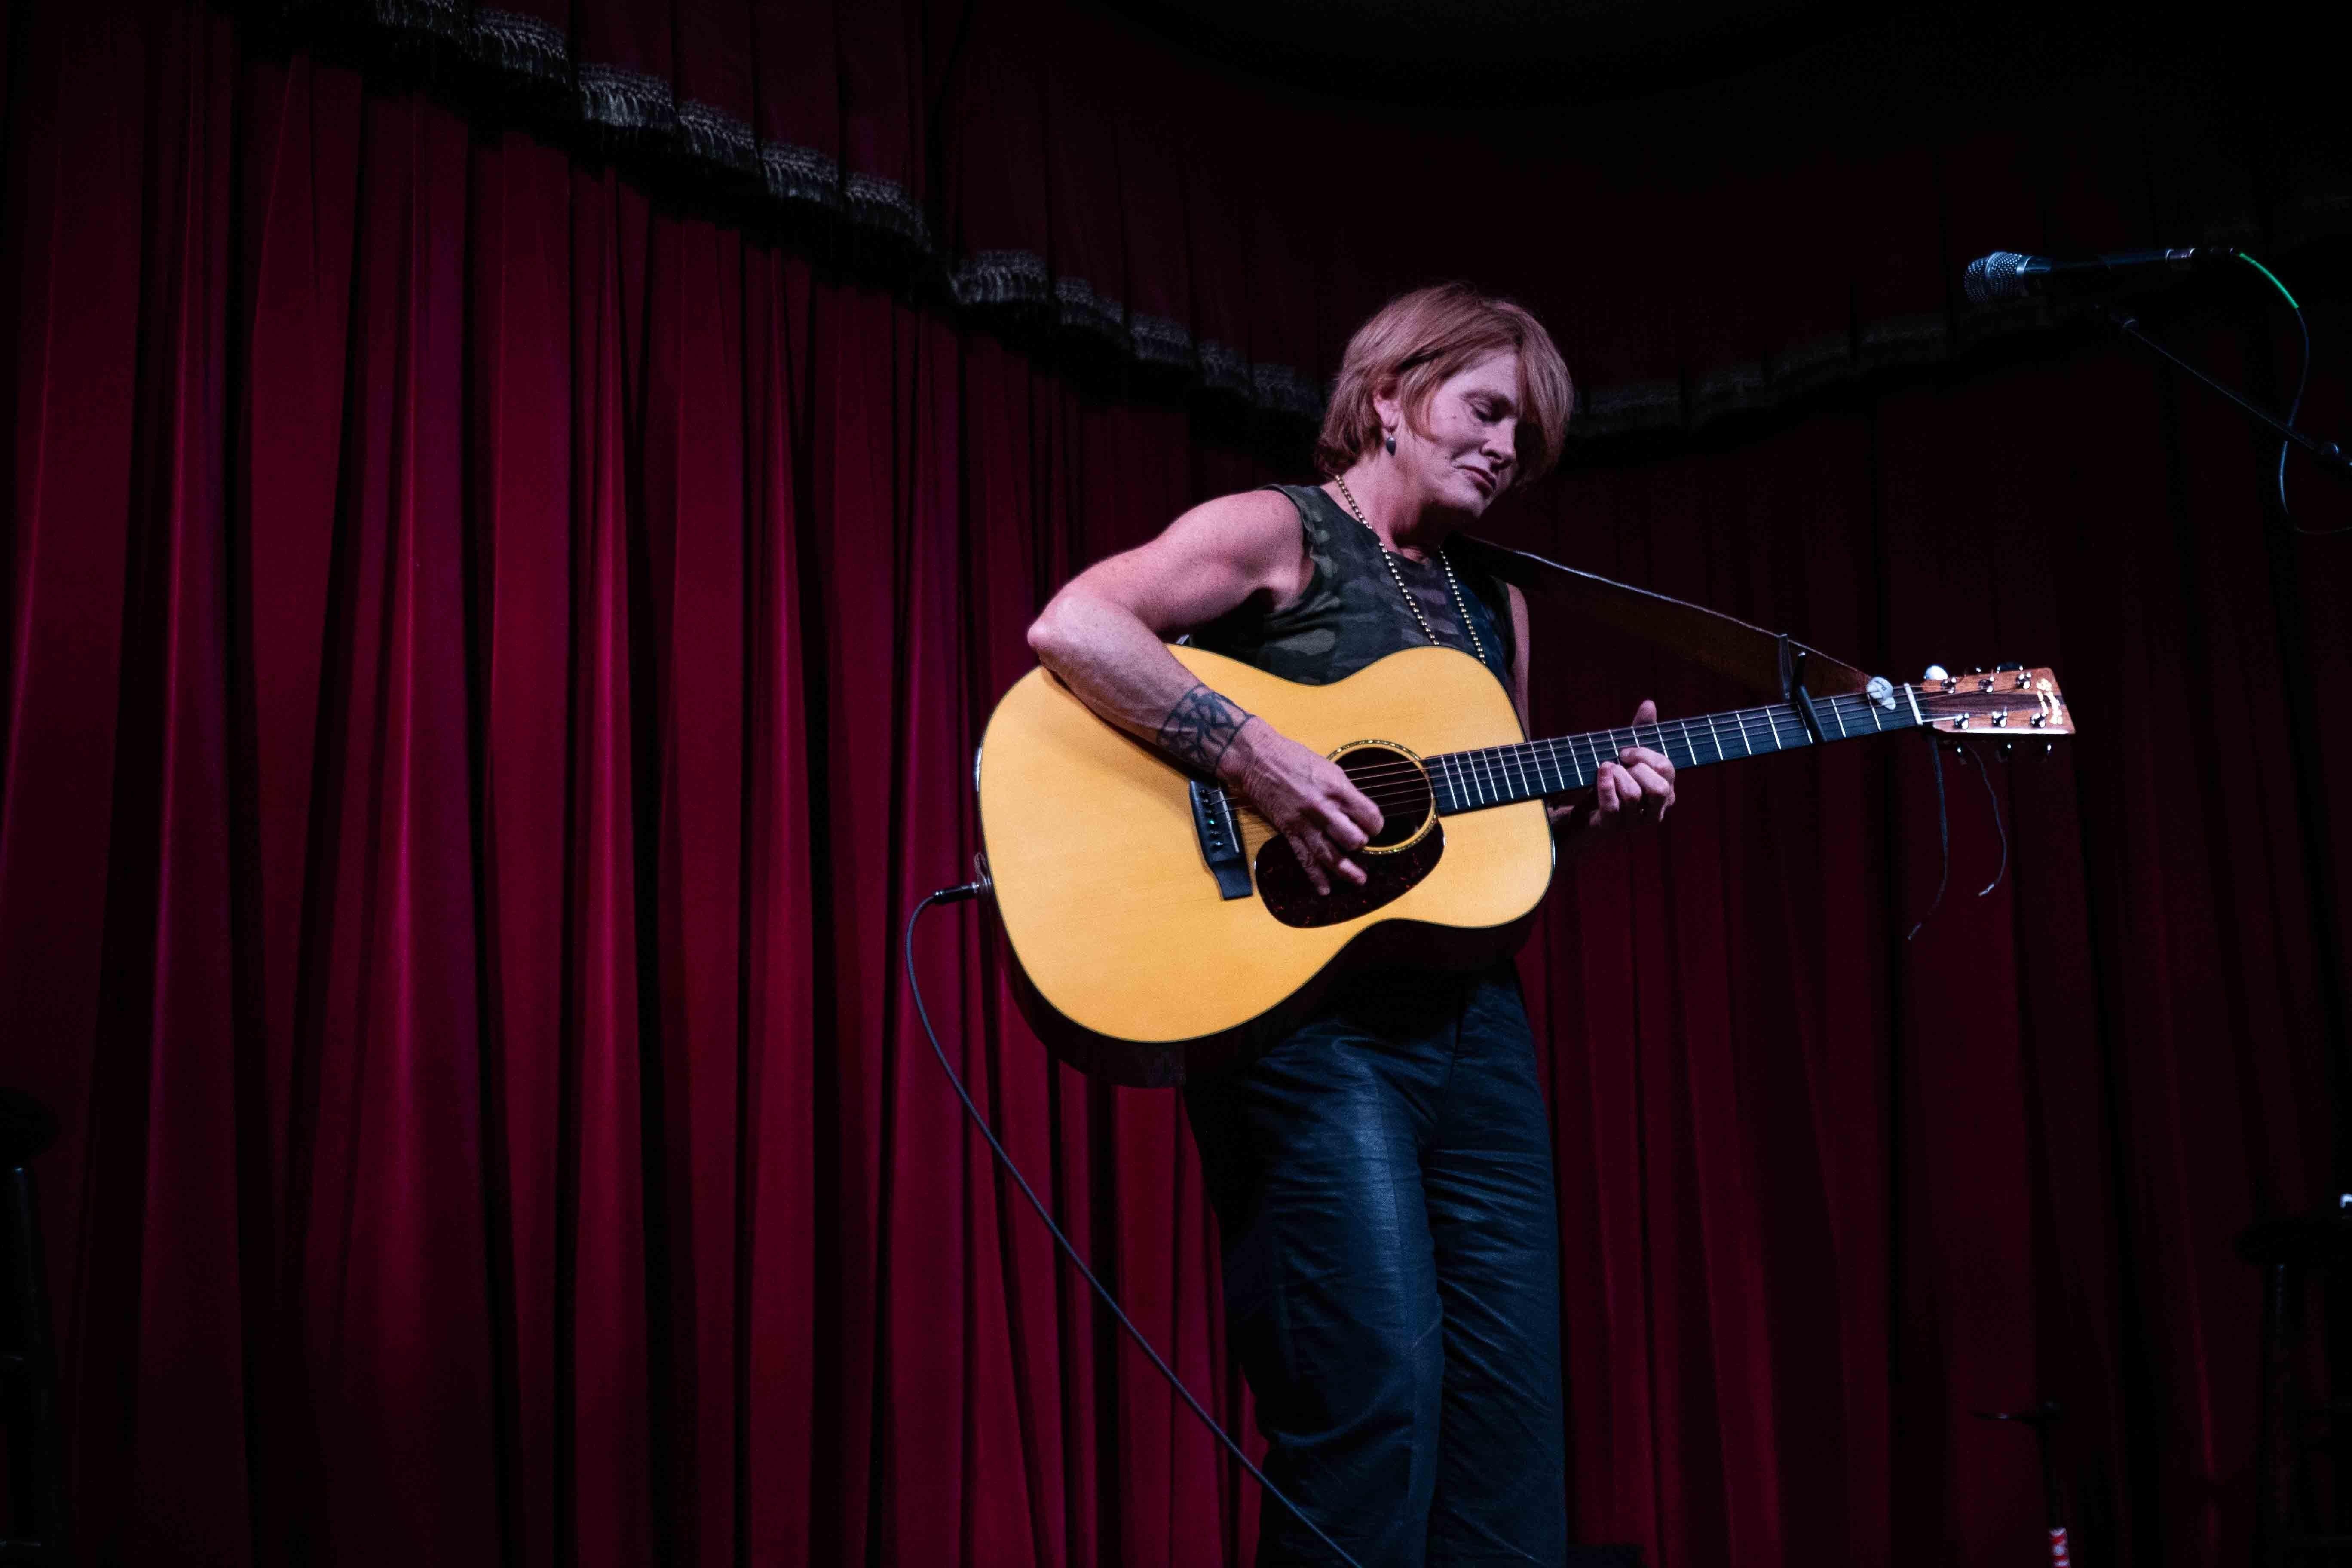 Shawn Colvin's new release "Lockdown: Live From Arlyn Studios" gathers tracks she recorded as part of a livestream series in 2020.